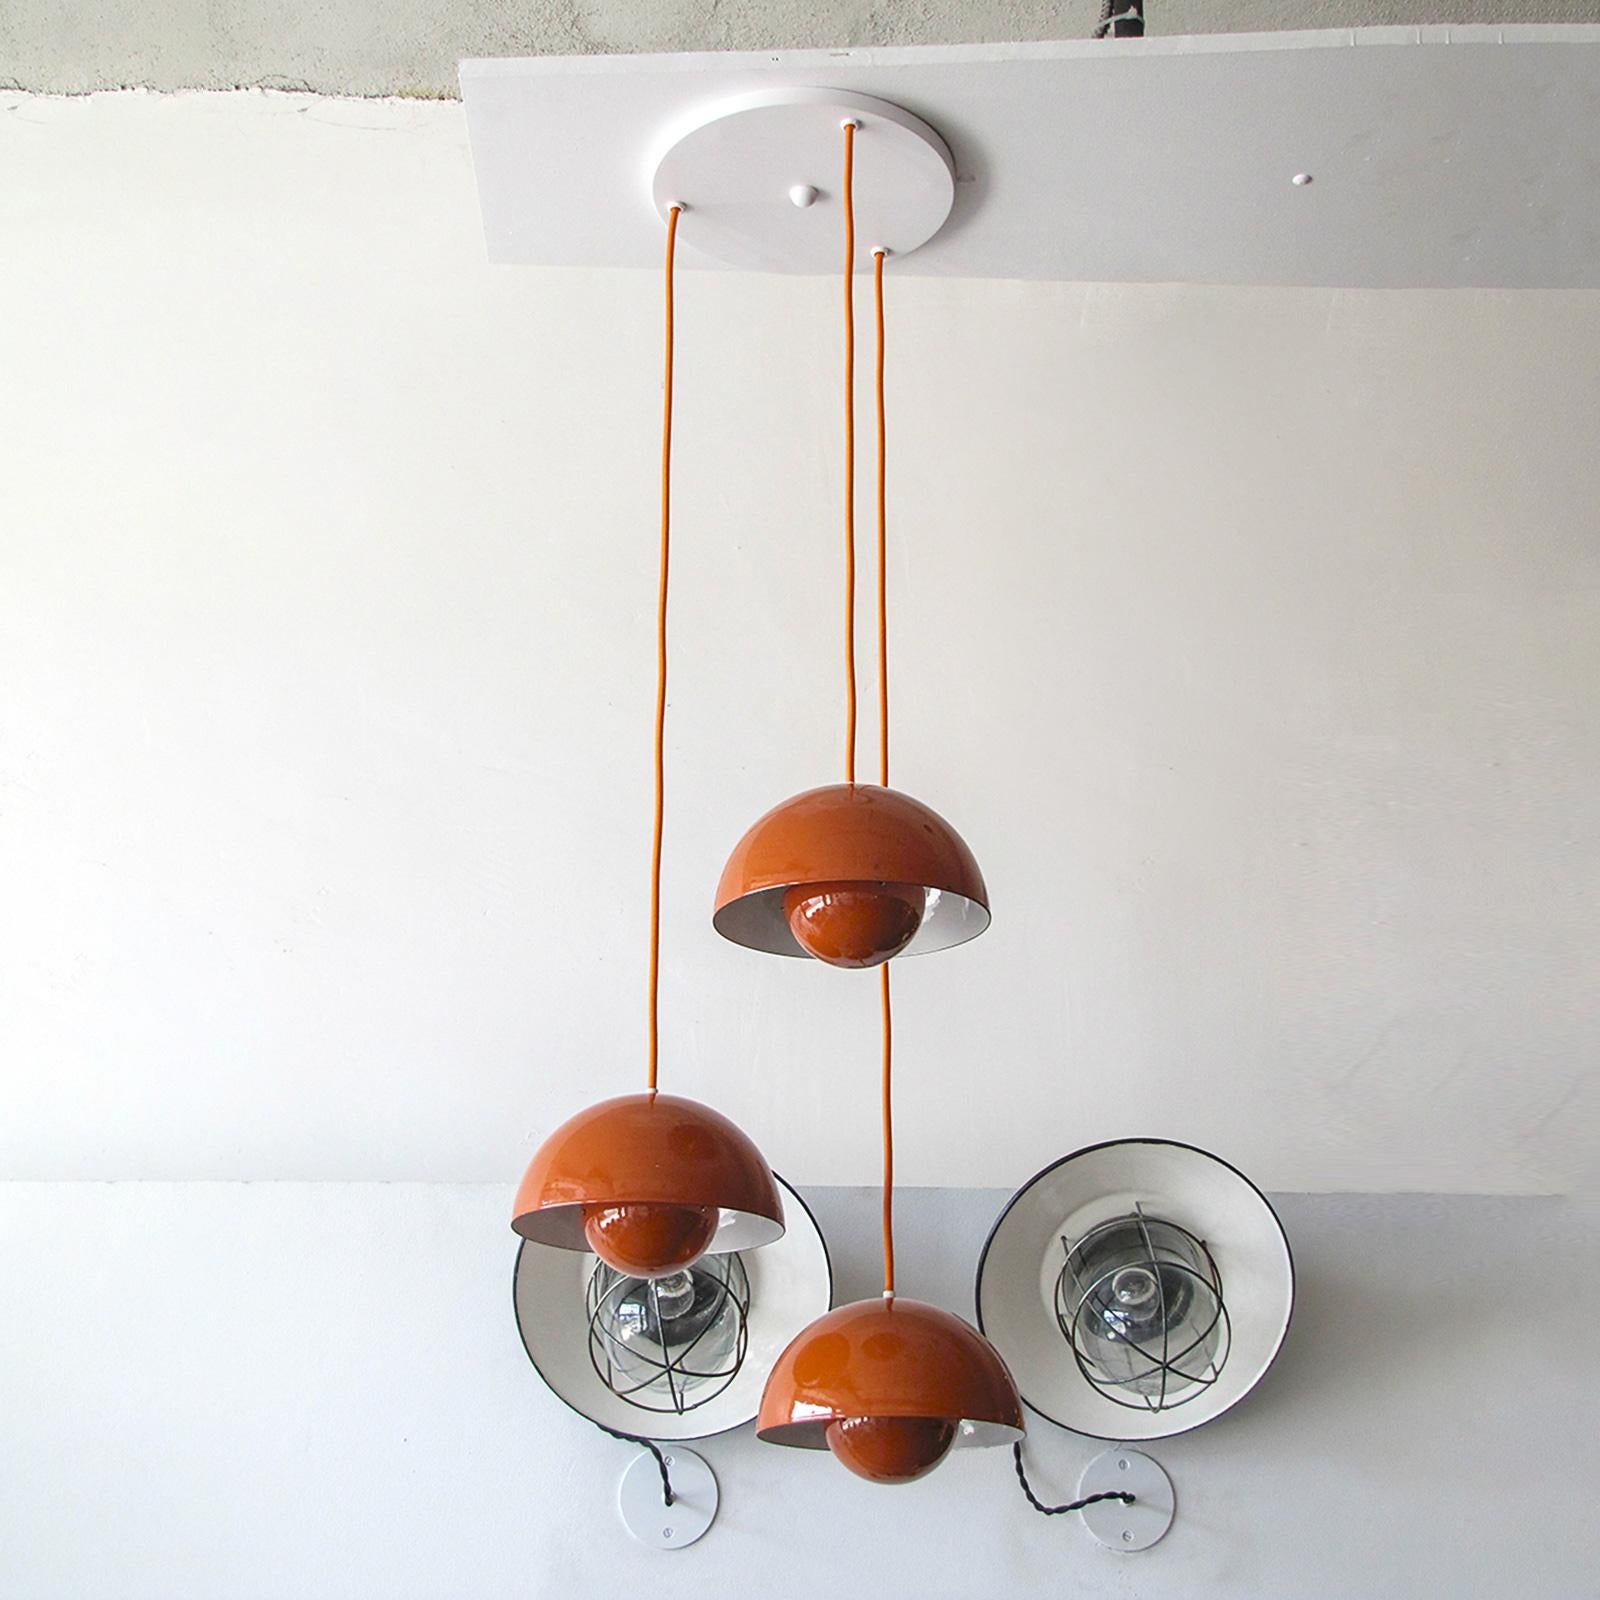 Wonderful 1970s flower pot hanging lights by Verner Panton for Louis Poulsen, three orange enameled pieces with matching new colored cords on a single canopy, insides of the reflector spheres is orange, heights are fully adjustable, one E26 sockets